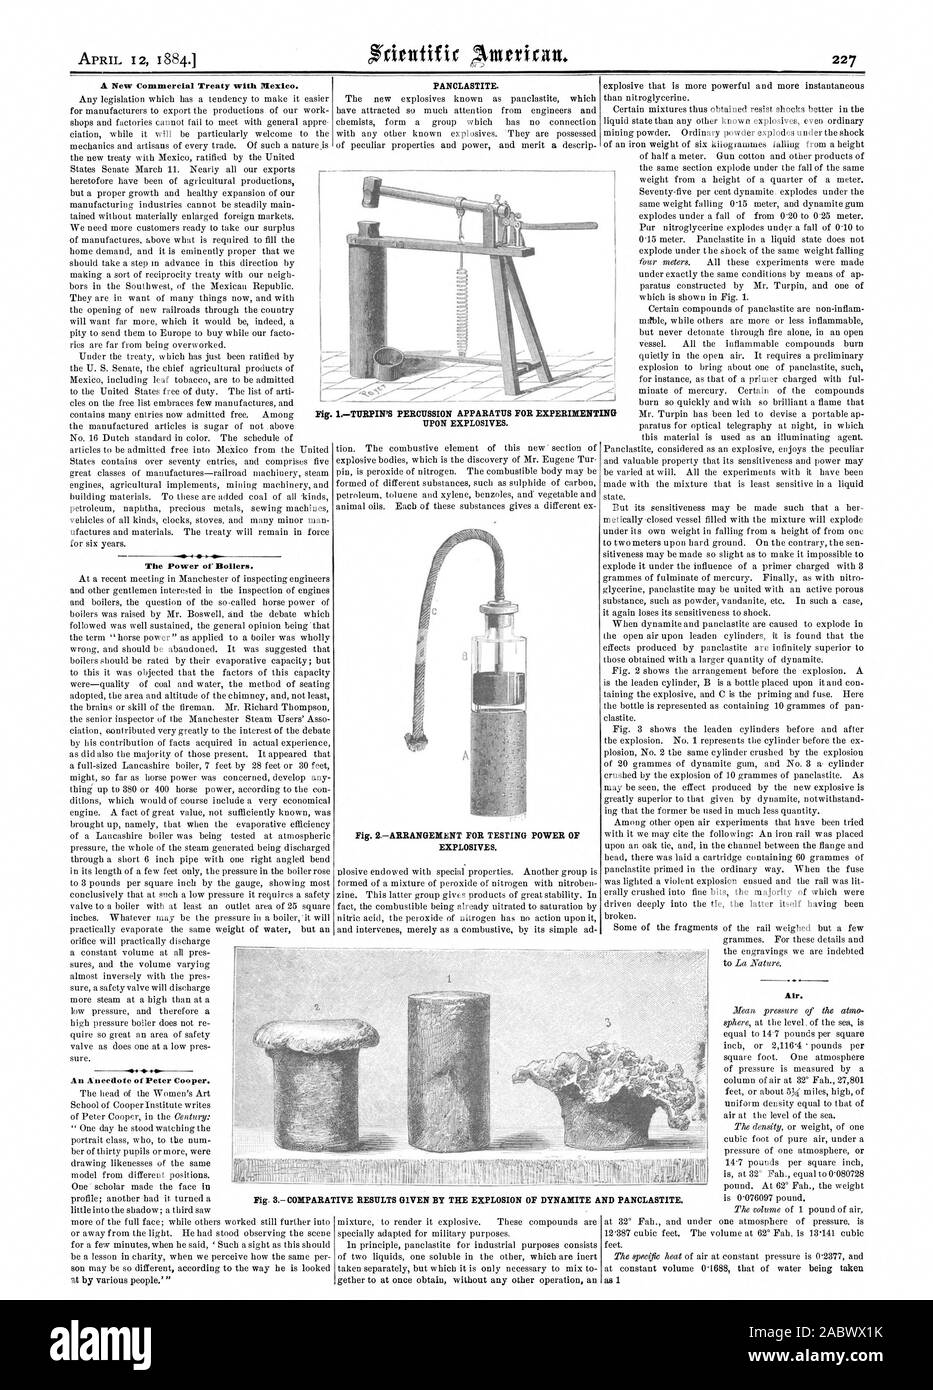 The Power of Boilers. An Anecdote Anecdote of Peter Cooper. PANCLASTITE. Fig. 2ARRANGEMENT FOR TESTING POWER OF EXPLOSIVES. Air. PERCUSSION APPARATUS FOR EXPERIMENTING UPON EXPLOSIVES. Fig. 8 COMPARATIVE RESULTS GIVEN BY THE EXPLOSION OF DYNAMITE AND PANCLASTITE., scientific american, 1884-04-12 Stock Photo